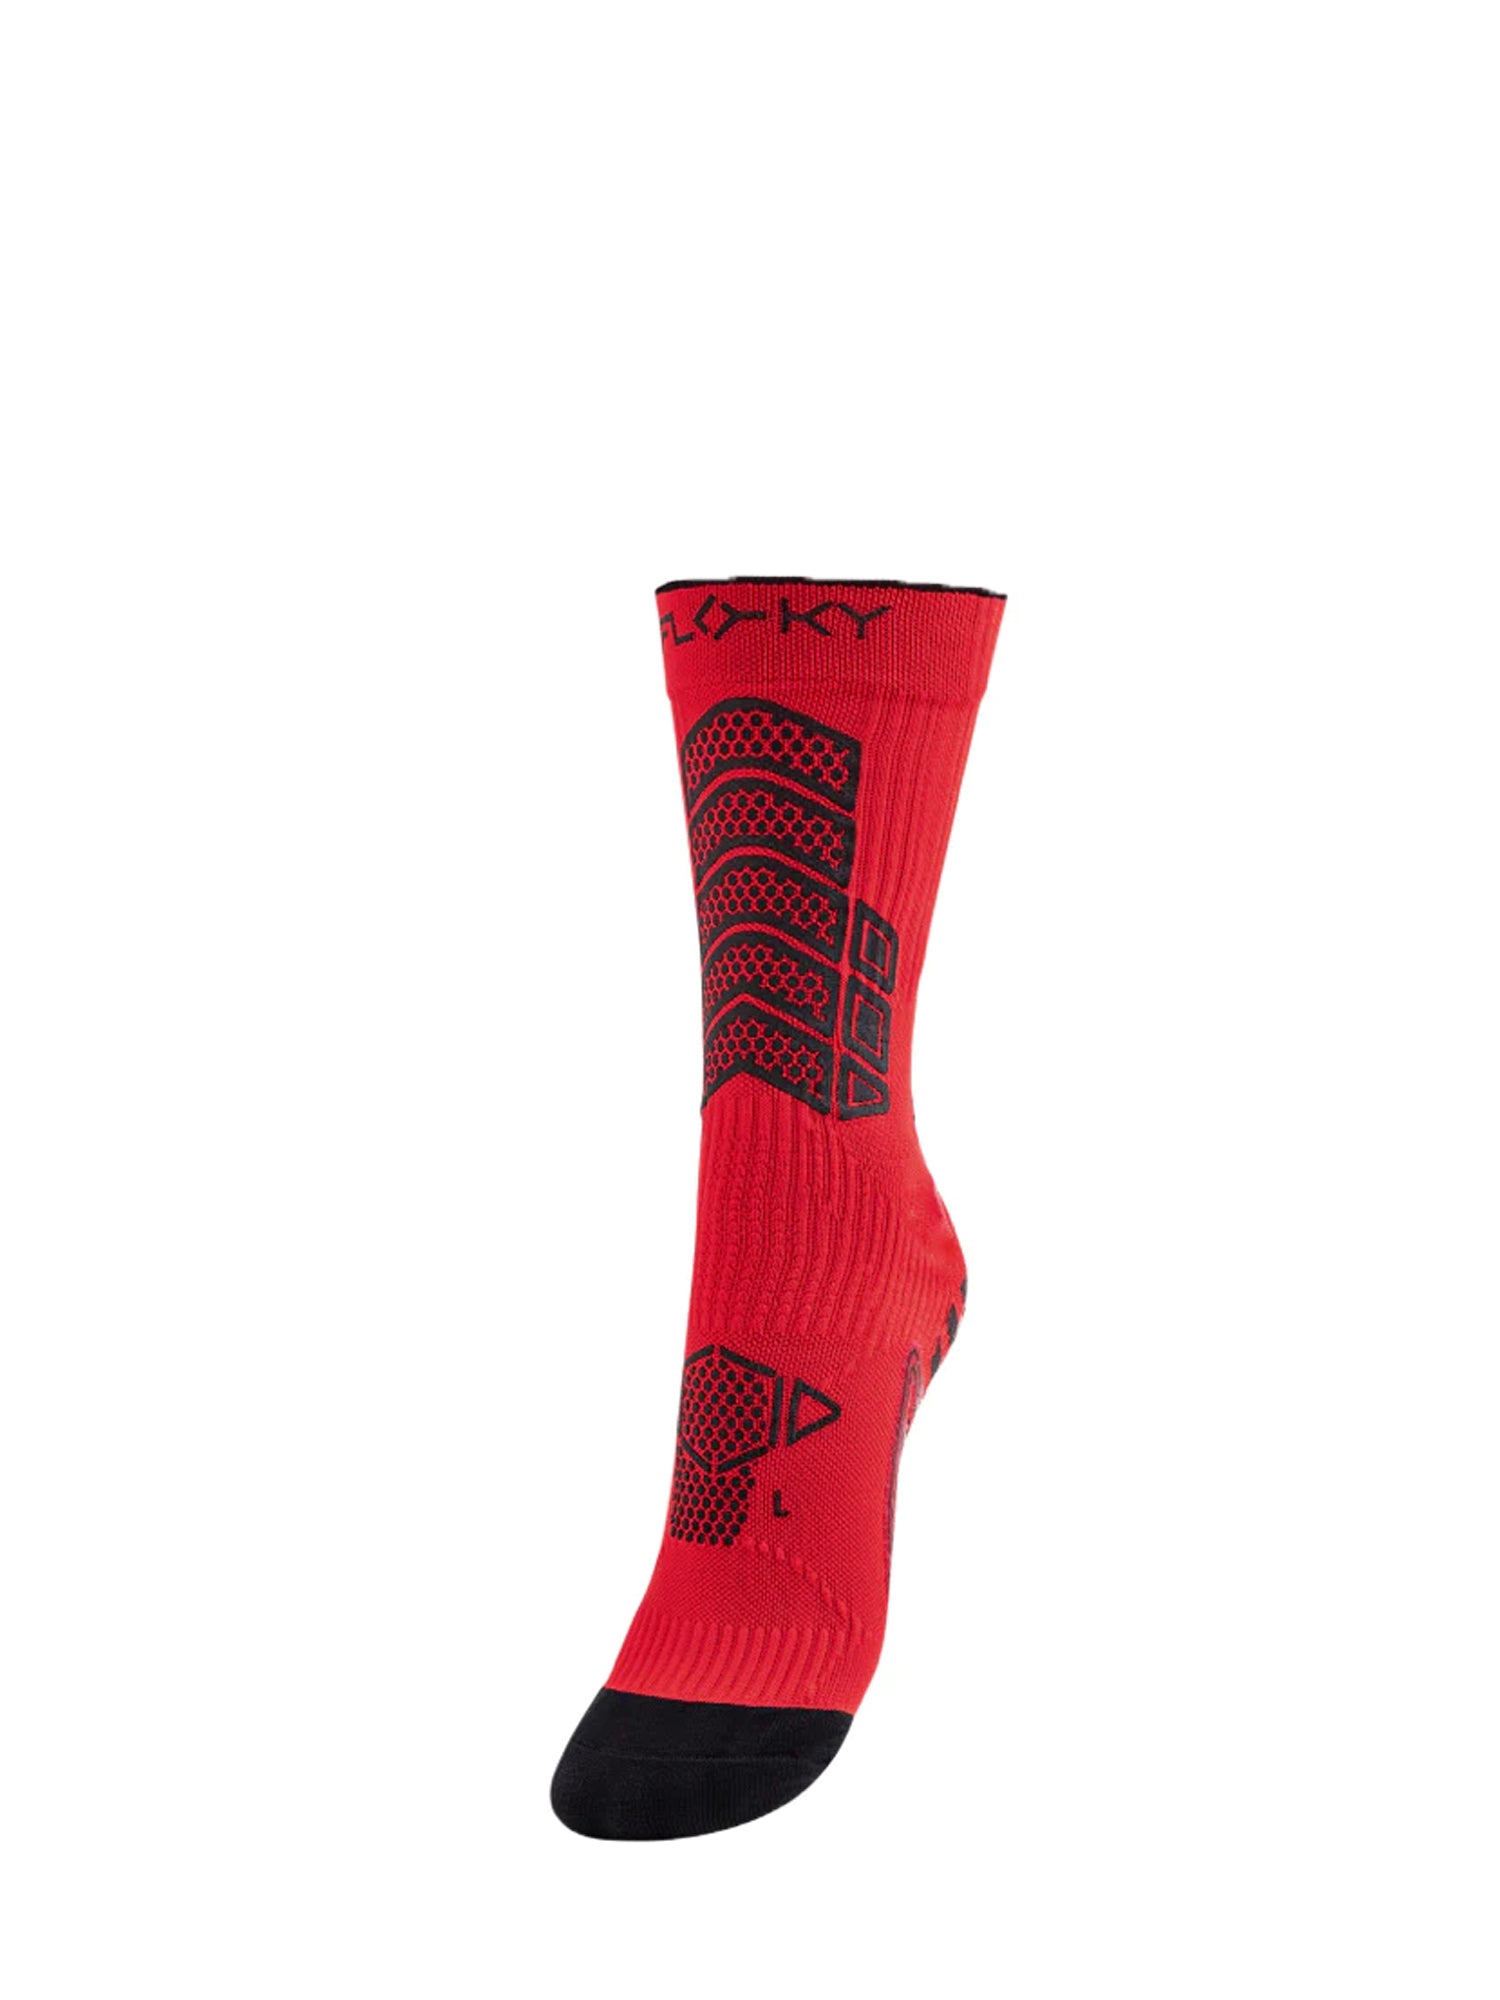 FLOKYSOCKS CALZE AXSIST ROSSO